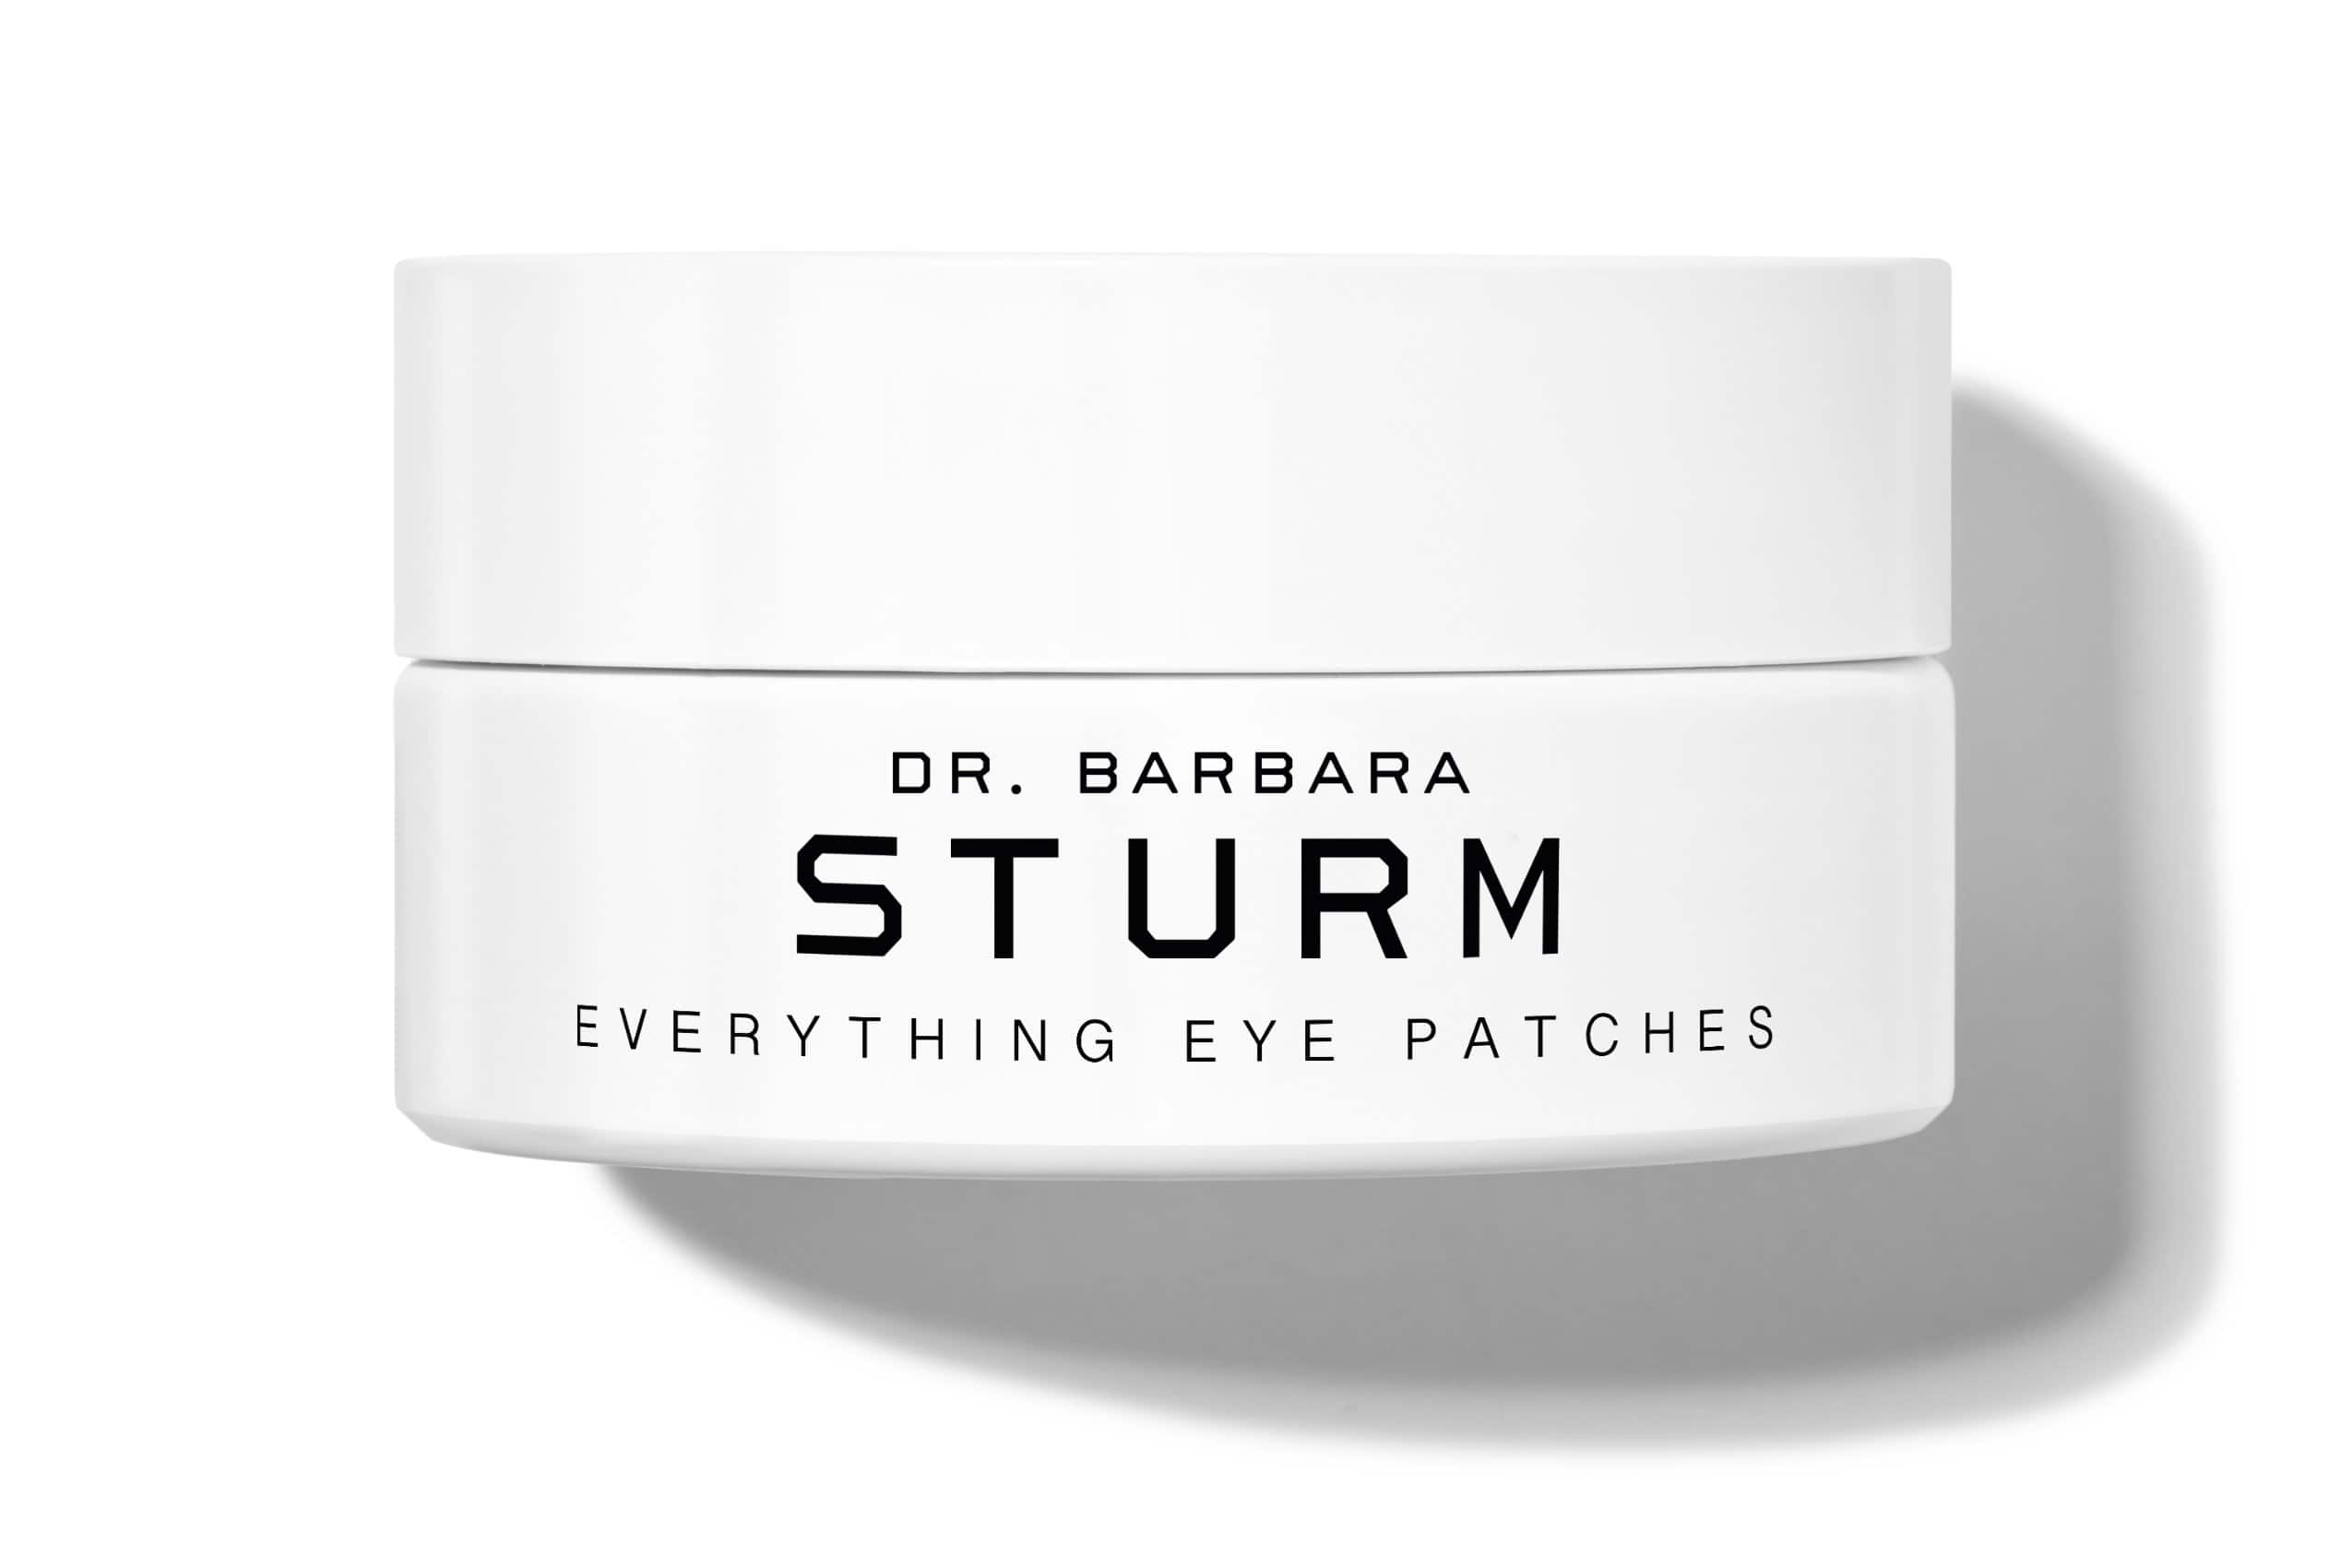 Dr. Barbara Sturm’s Everything Eye Patches